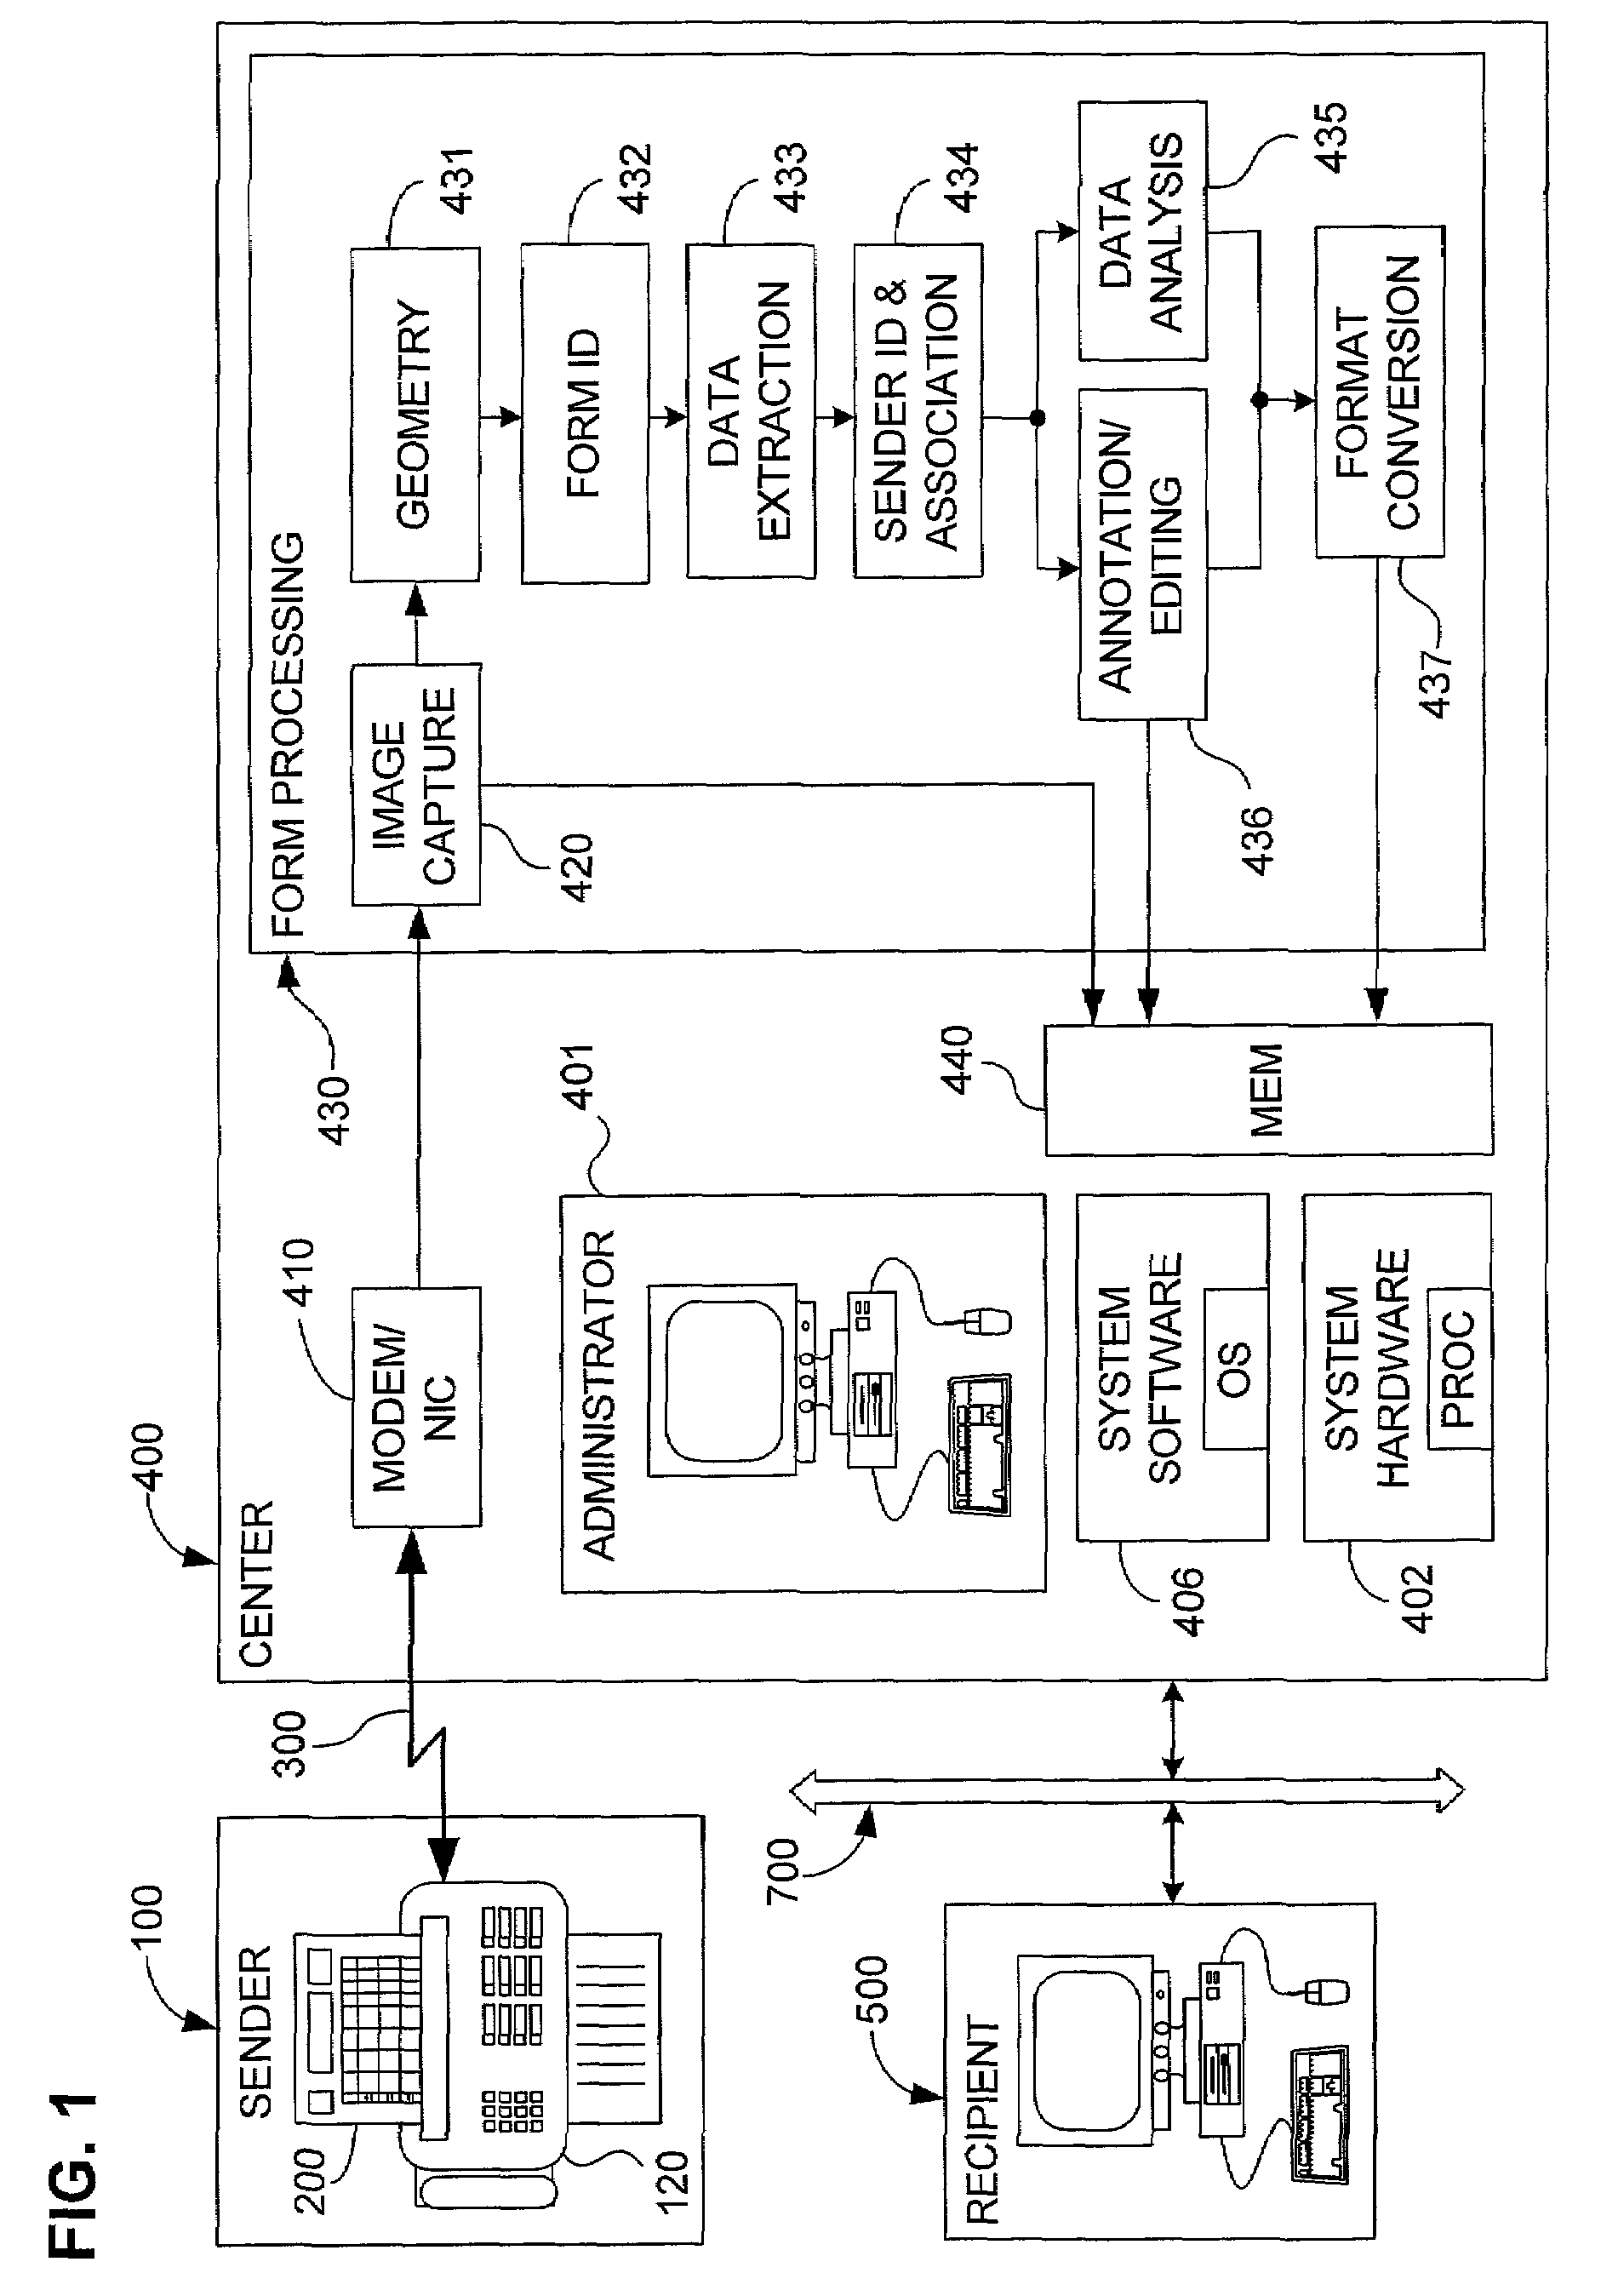 System and method for centralized, automatic extraction of data from remotely transmitted forms